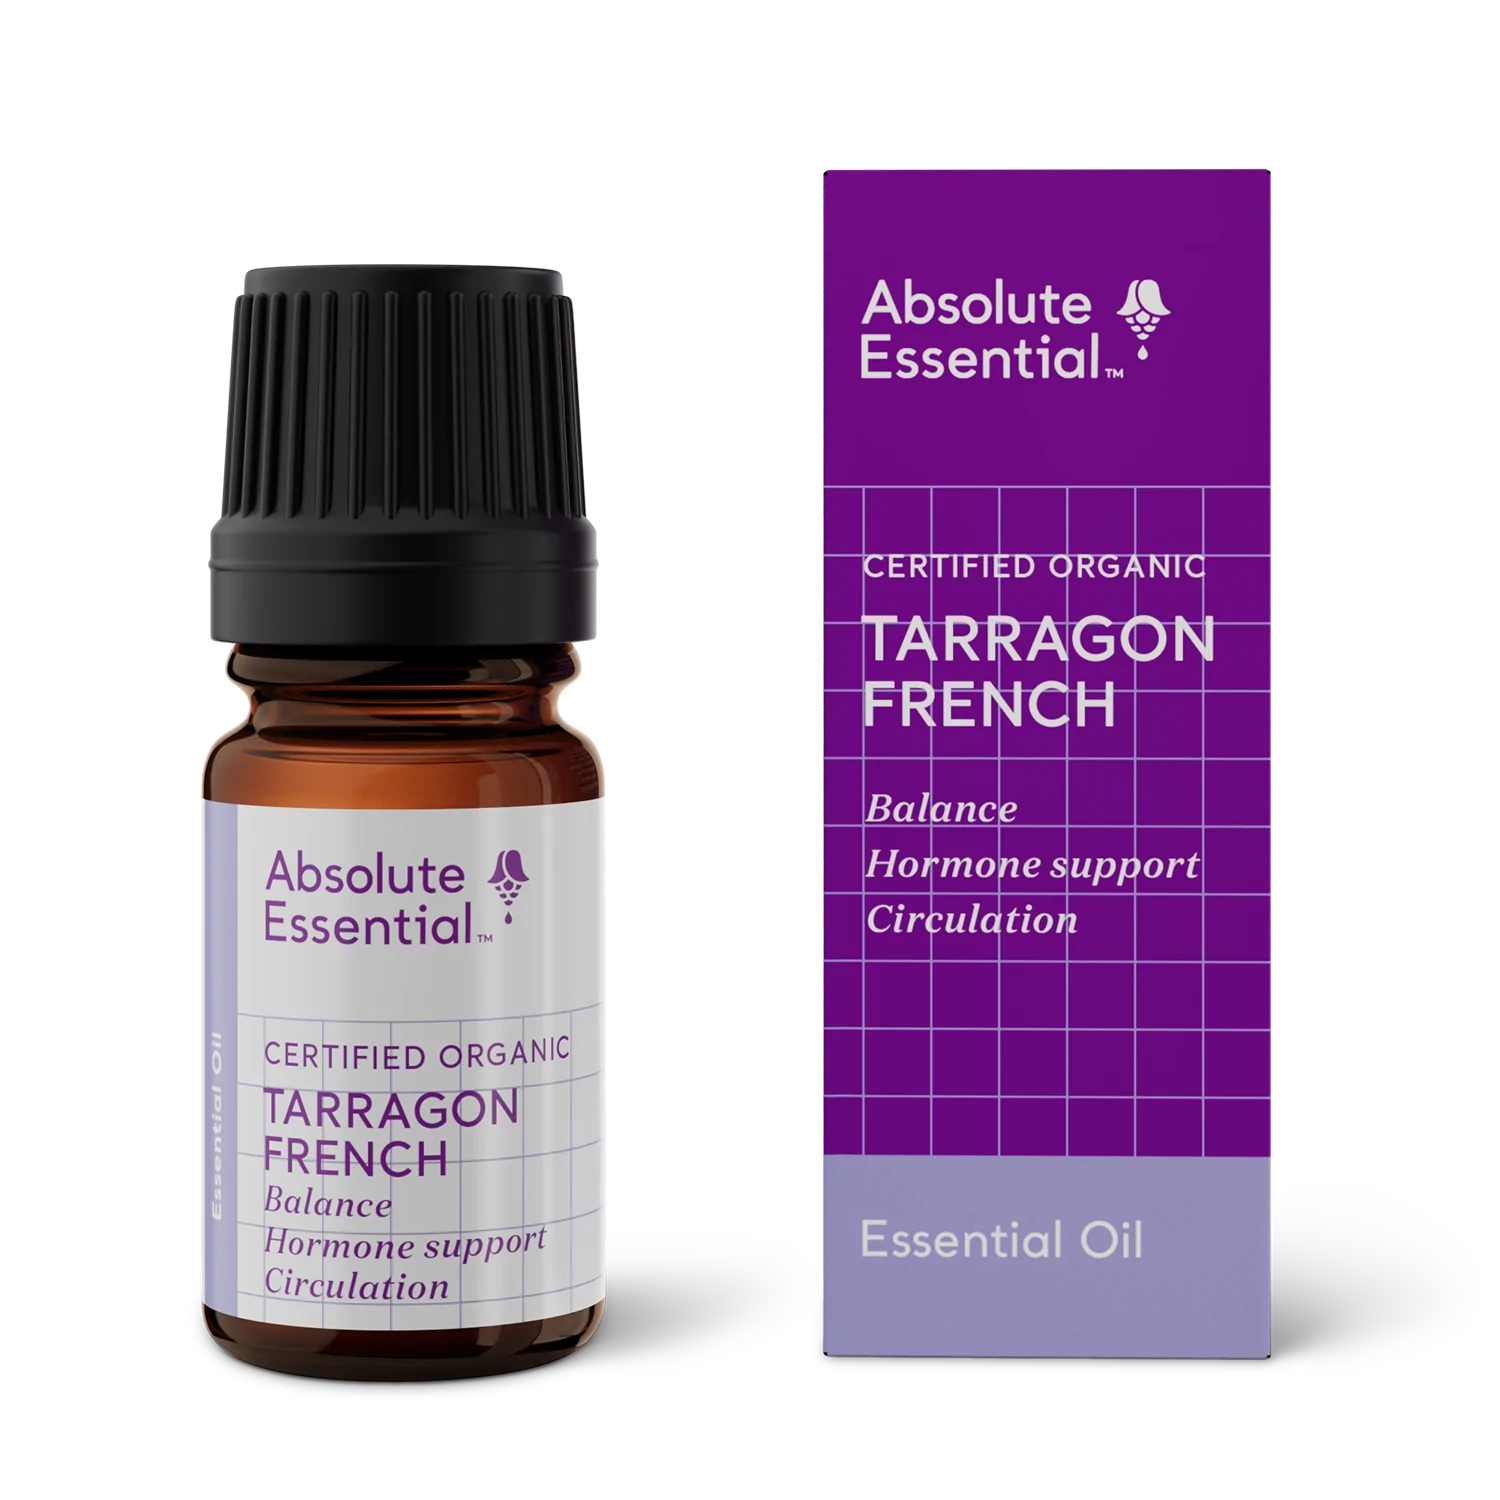 Absolute Essential Oil Tarragon French